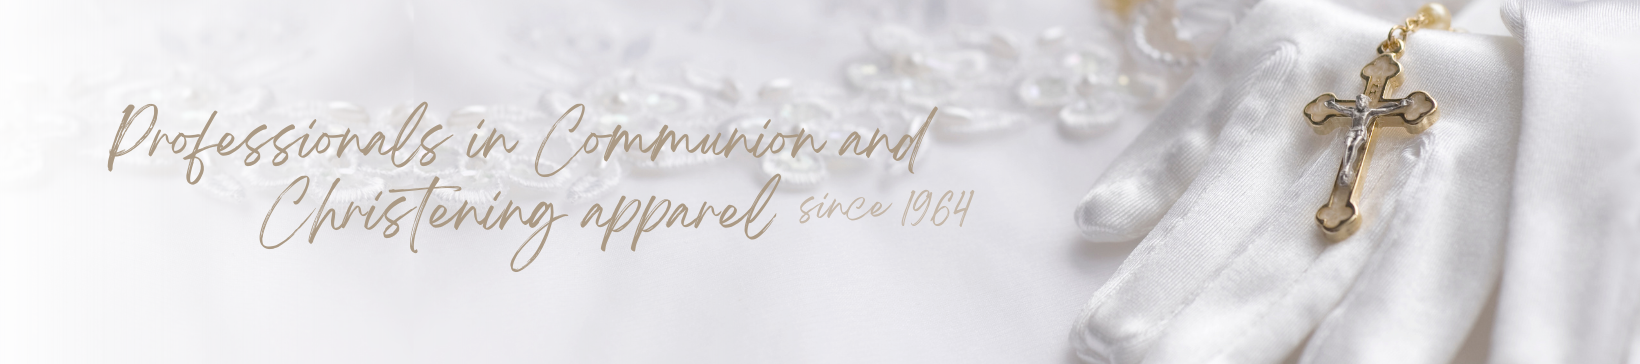 lARGEST SELECTION OF cOMMUNION APPAREAL